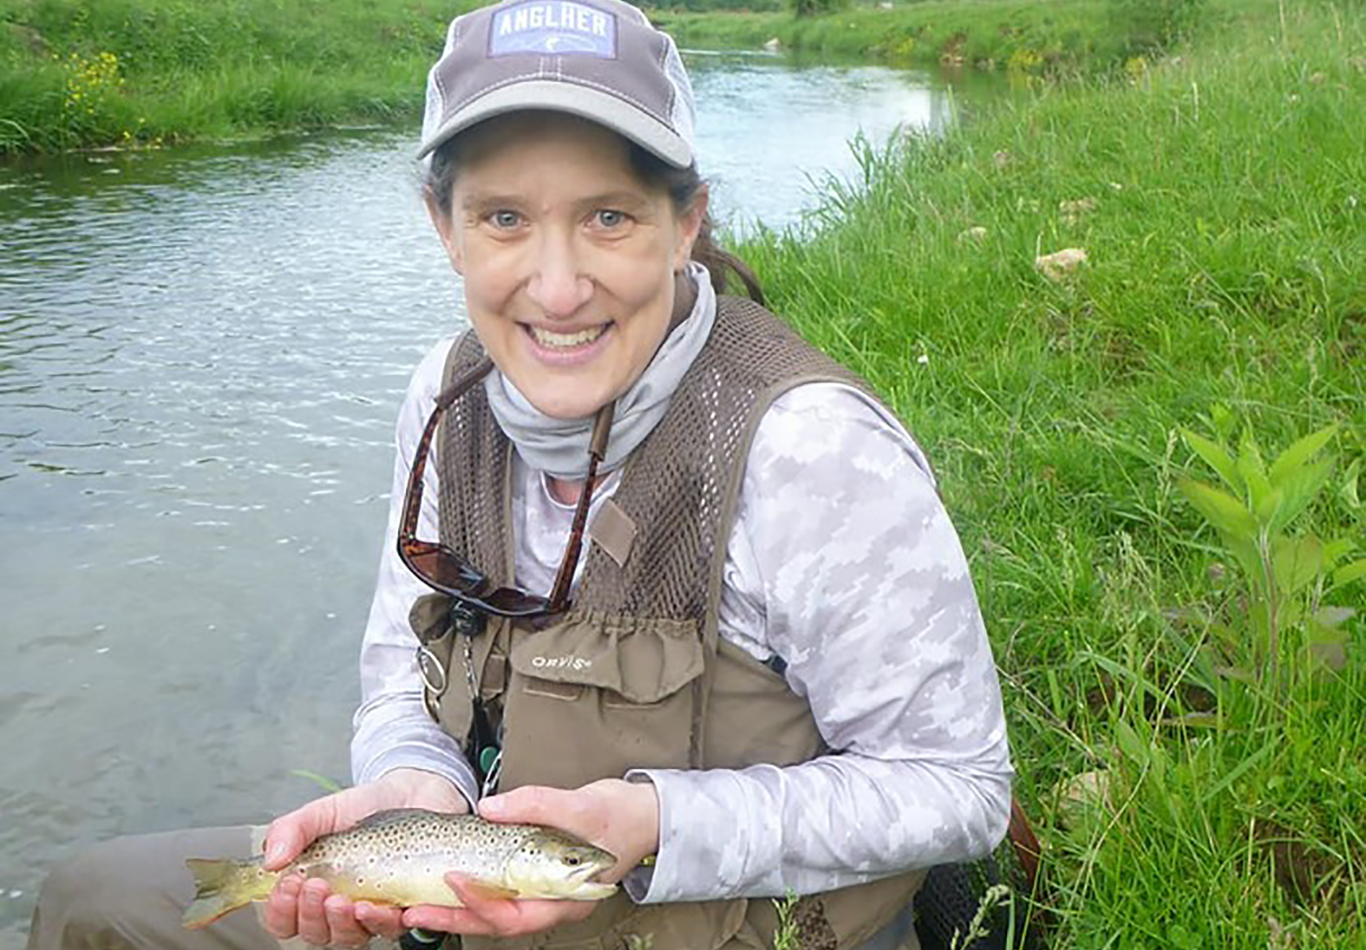 Well-Known Fly Fishing Guides Perish Tragically in Fishing Accident